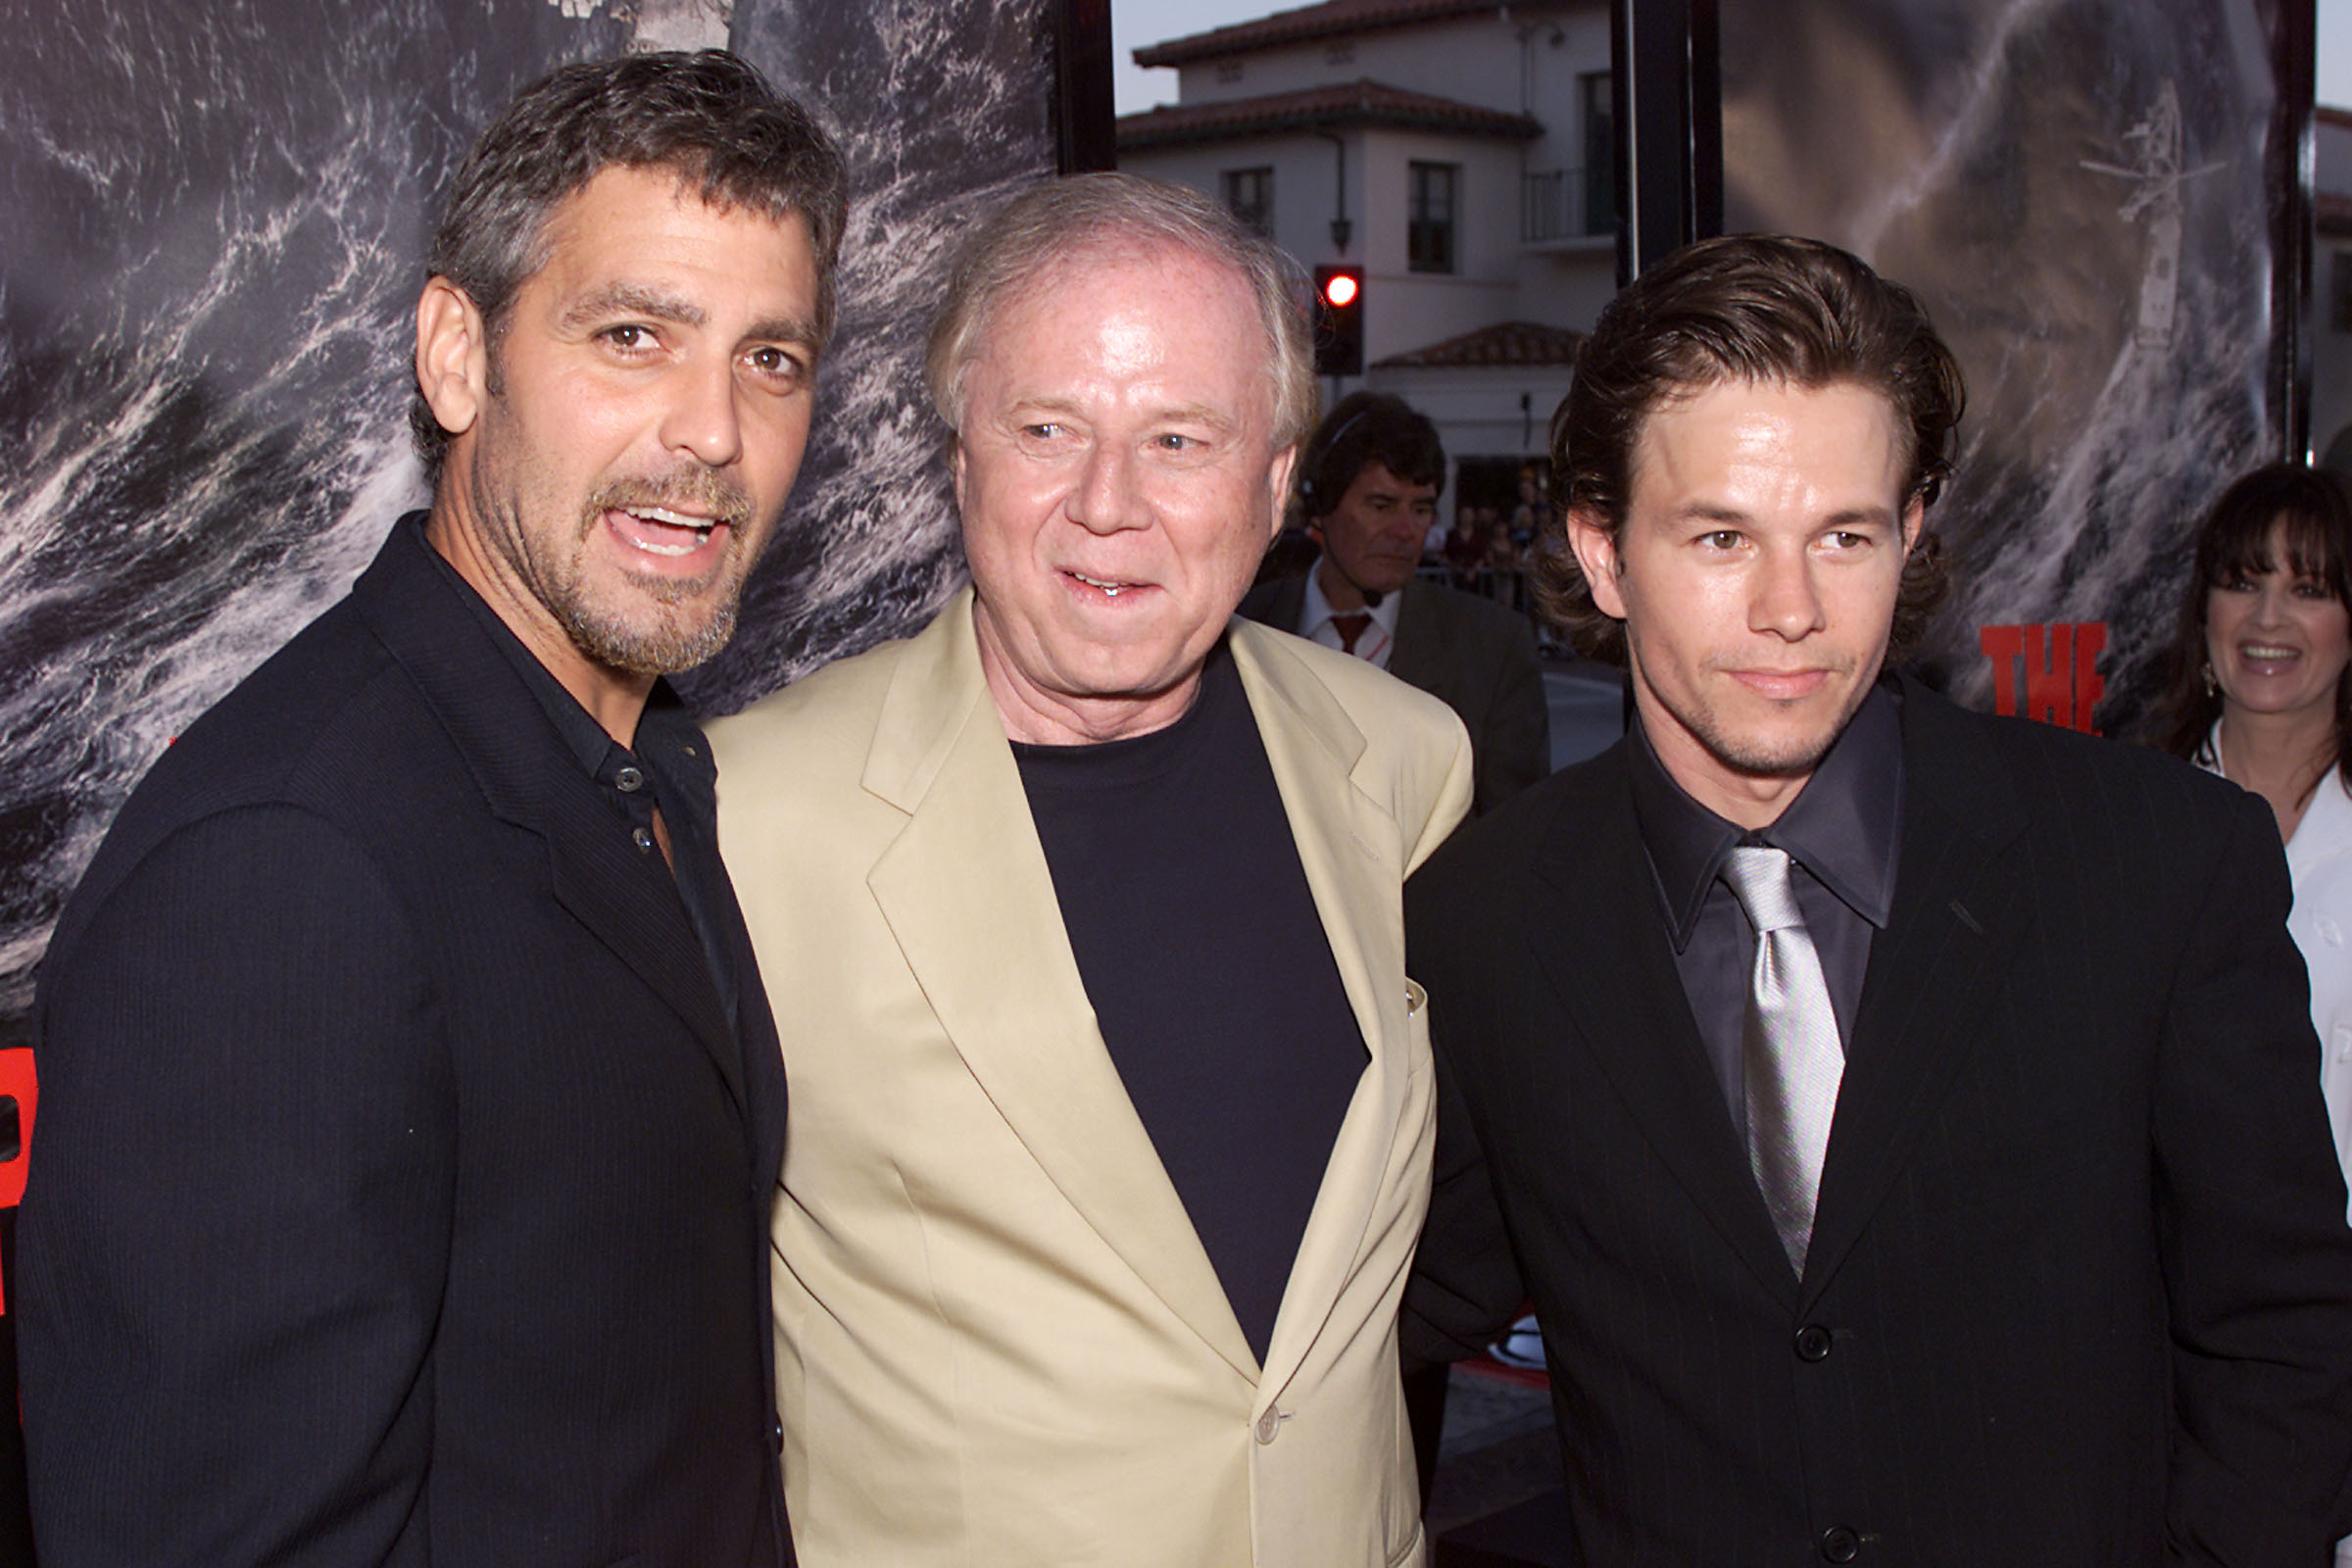 Wolfgang Petersen, filmmaker of 'Das Boot', 'In the Line of Fire', 'The Perfect Storm' dies at 81